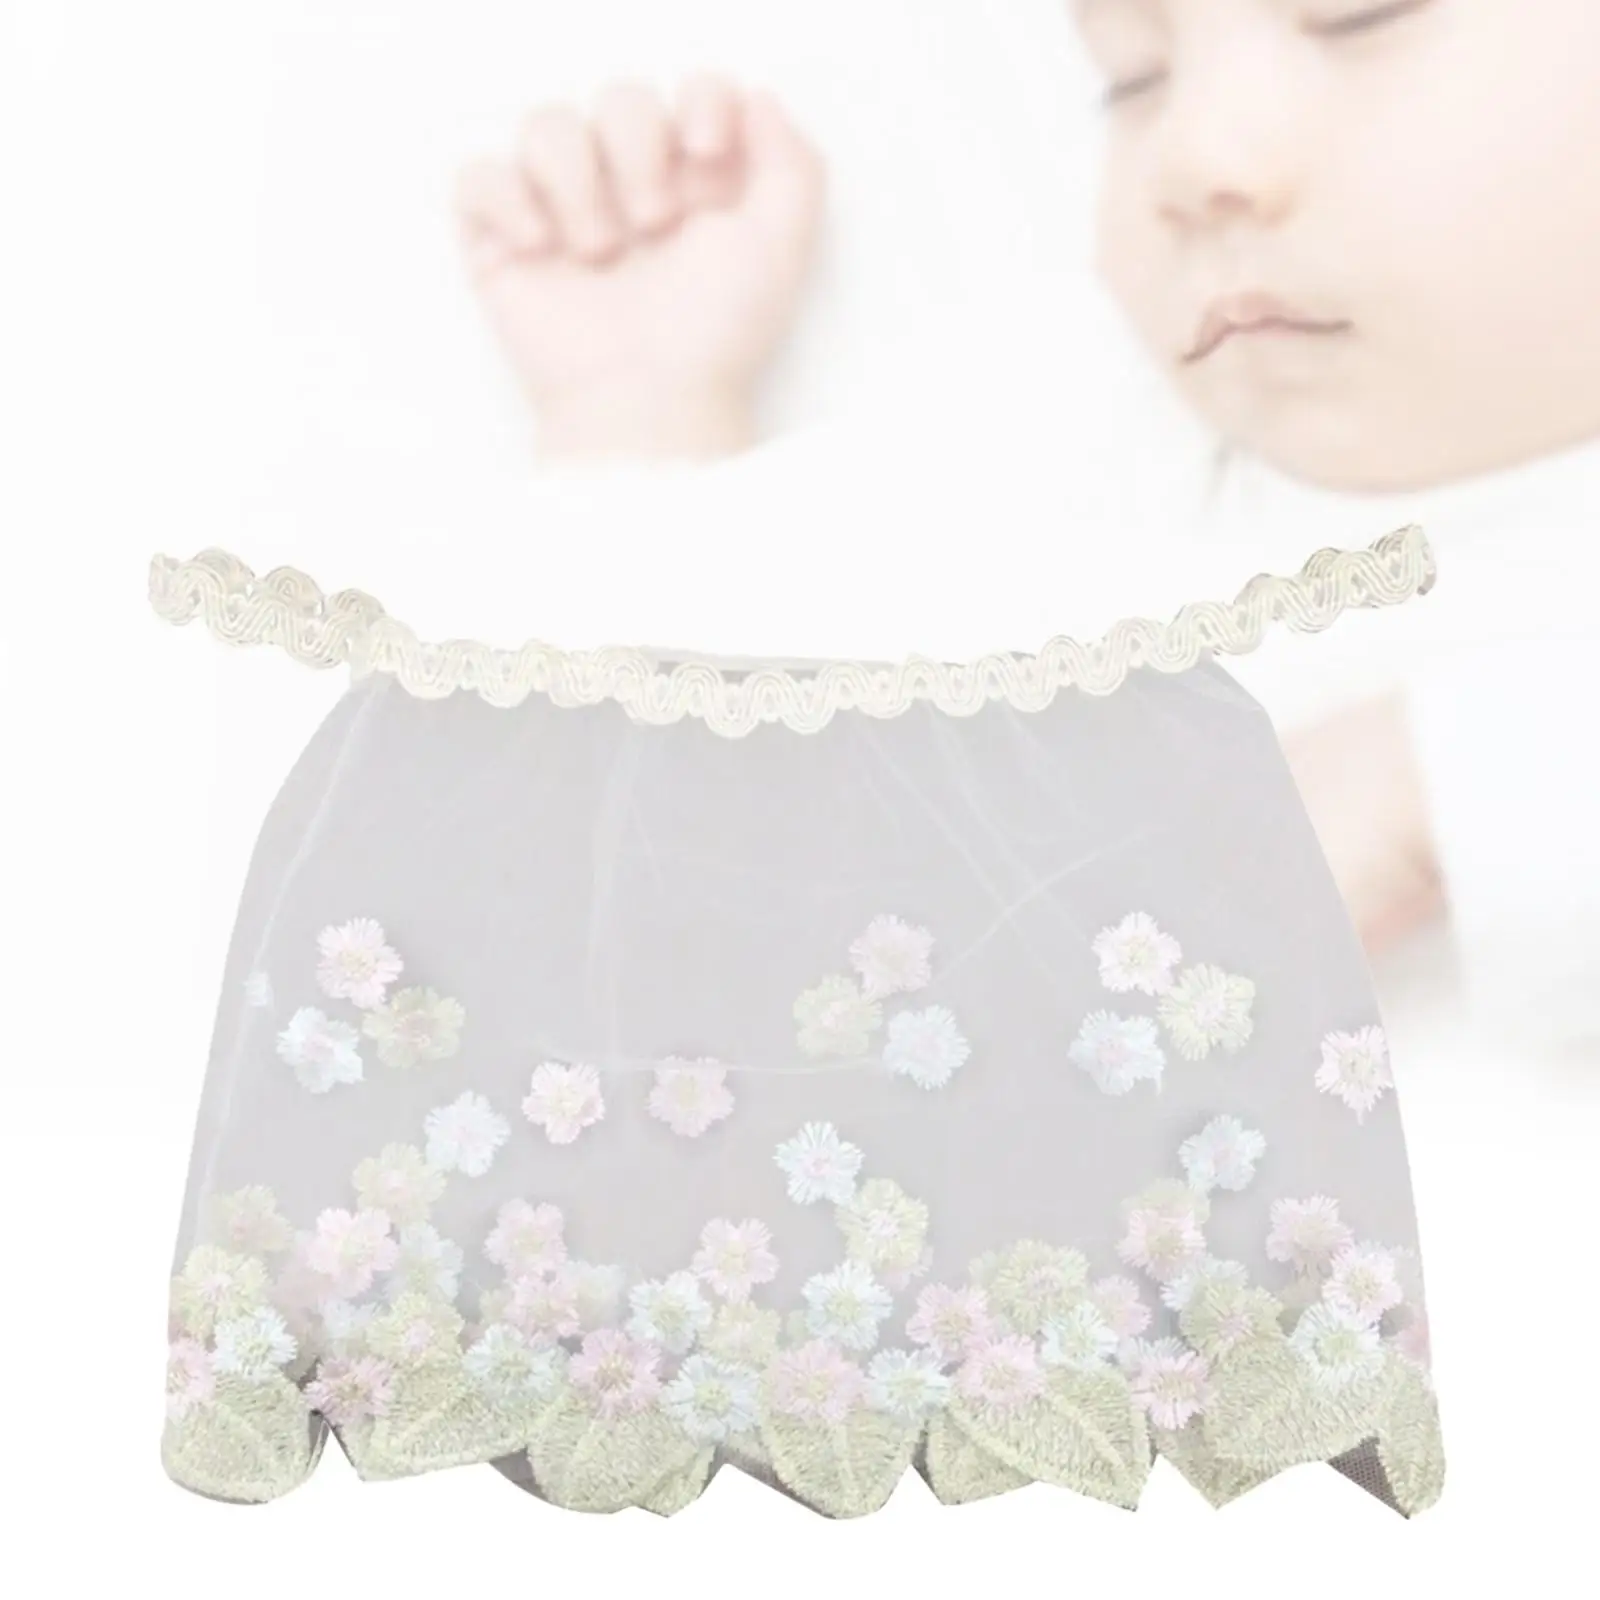 Newborn Photography Props Lace Romper Photo Outfits Embroidery Perspective Skirt Clothing Costume Bodysuit Backless Lace Wrap